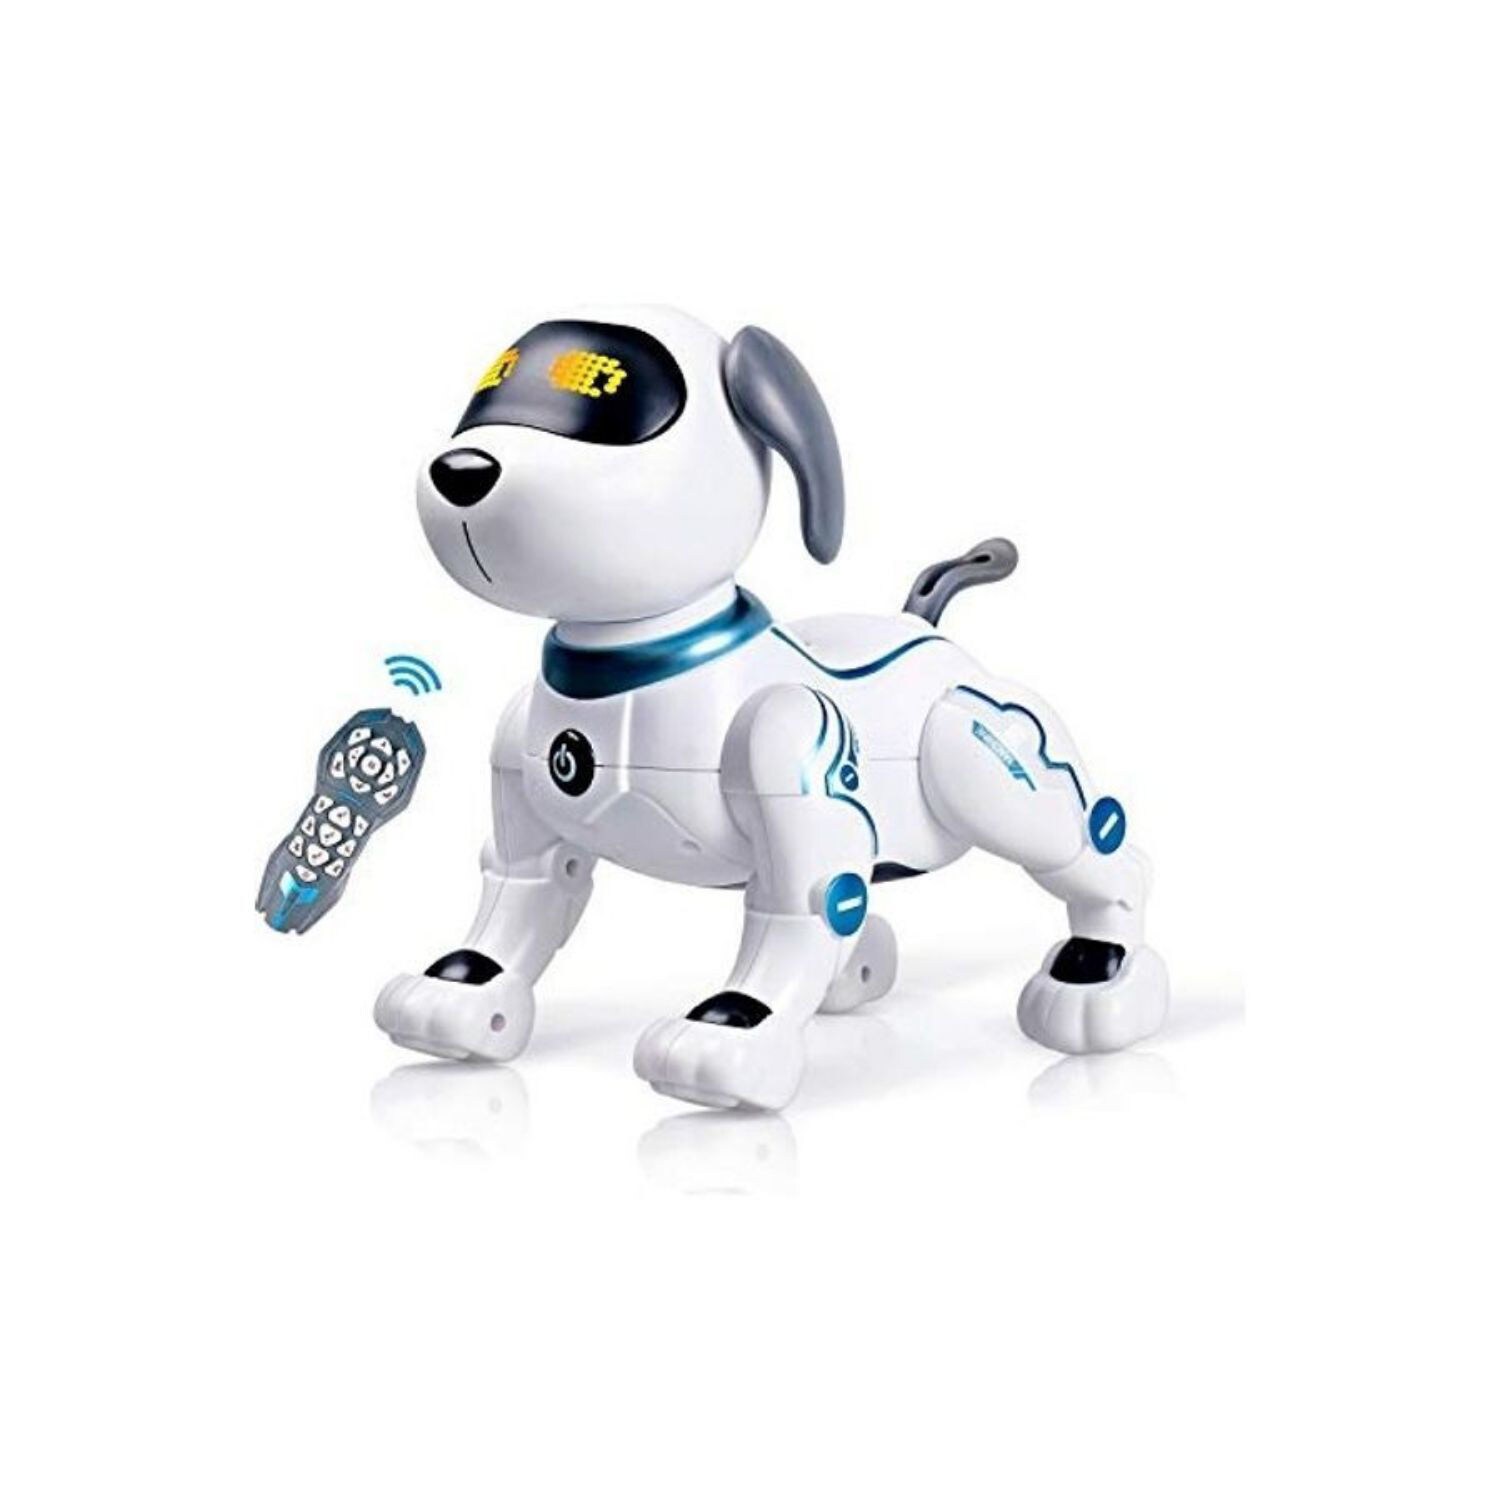 Remote Control Robot Dog Toy